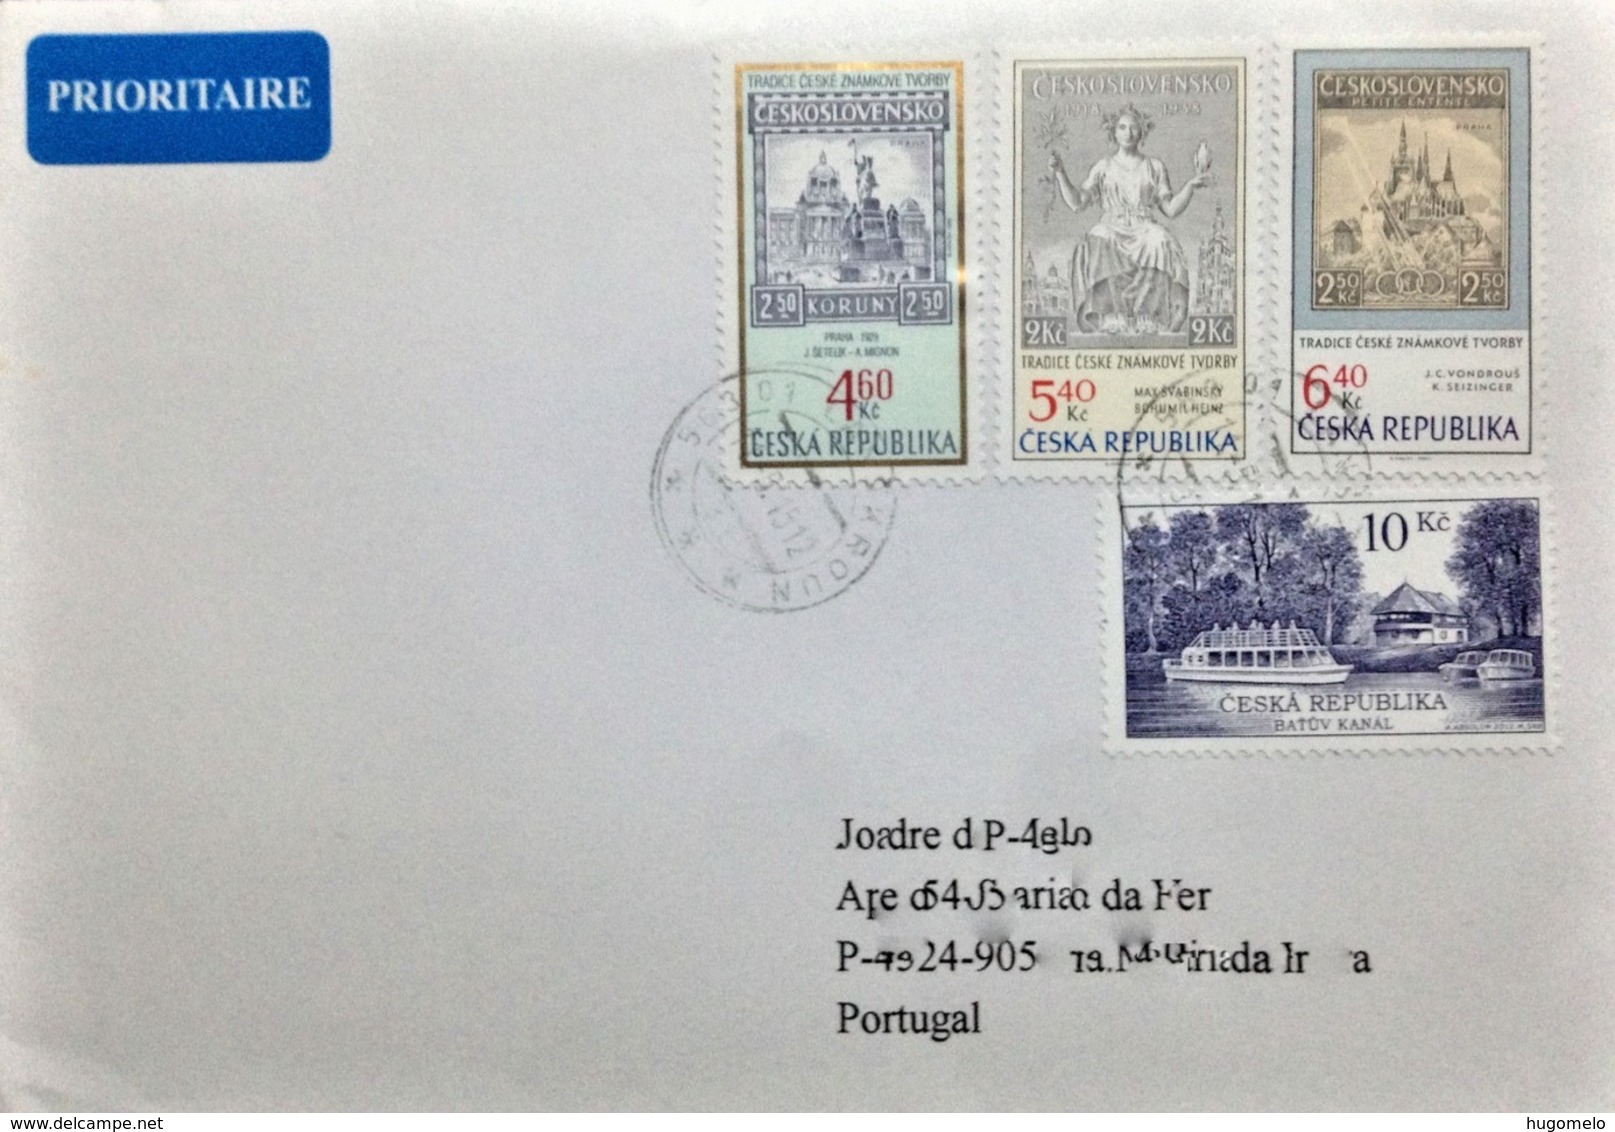 Czech Republic, Circulated Cover To Portugal, "Batuv Channel", "Ships", "Architecture", 2015 - Covers & Documents